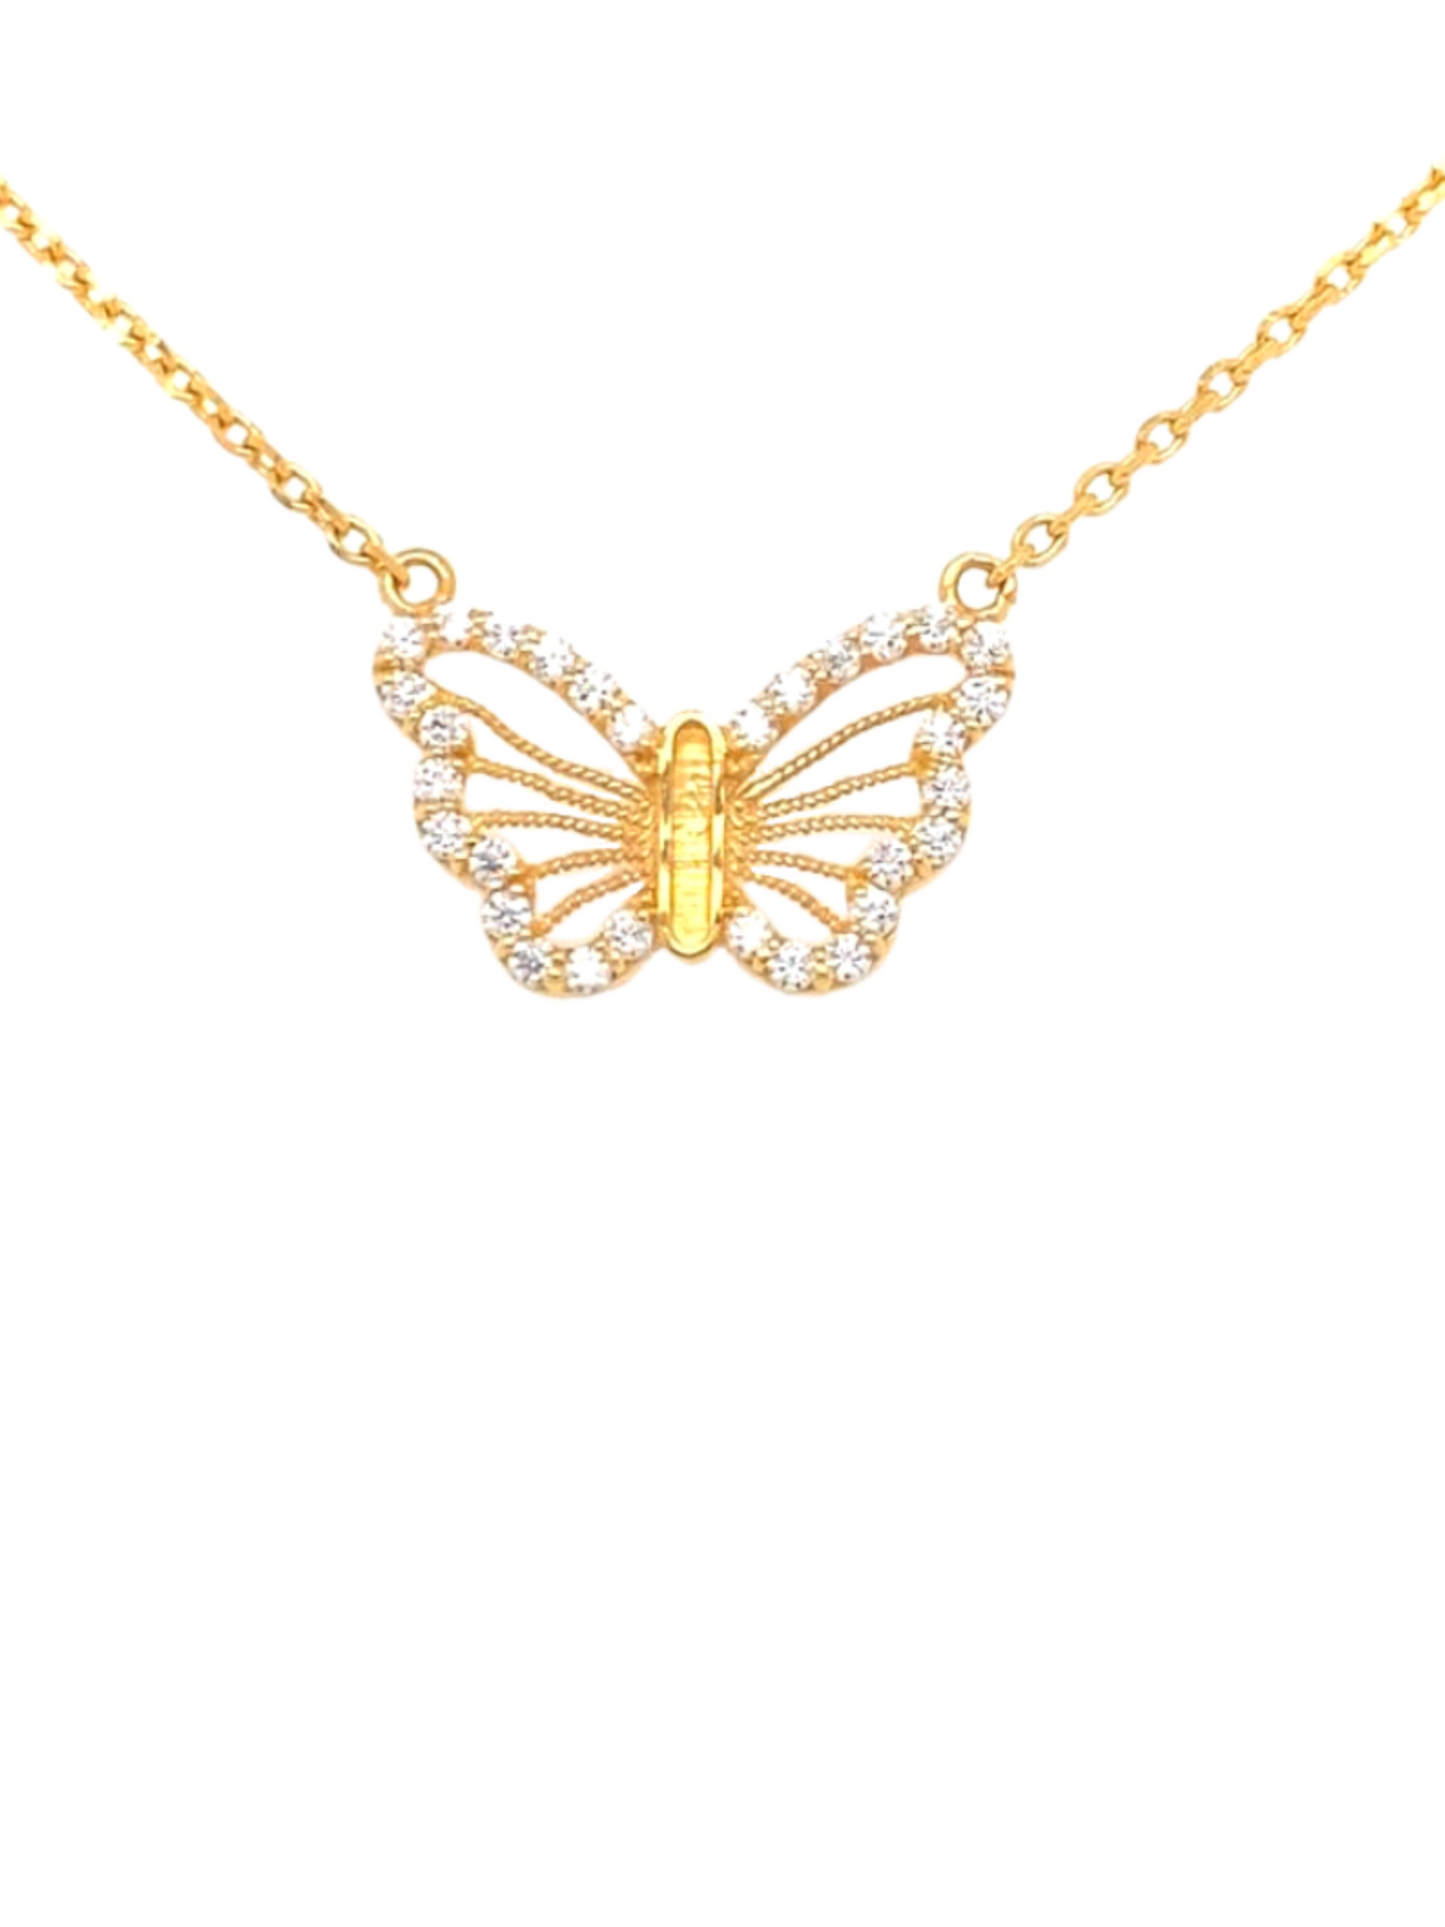 22KT Gold Butterfly Necklace with CZ Stones